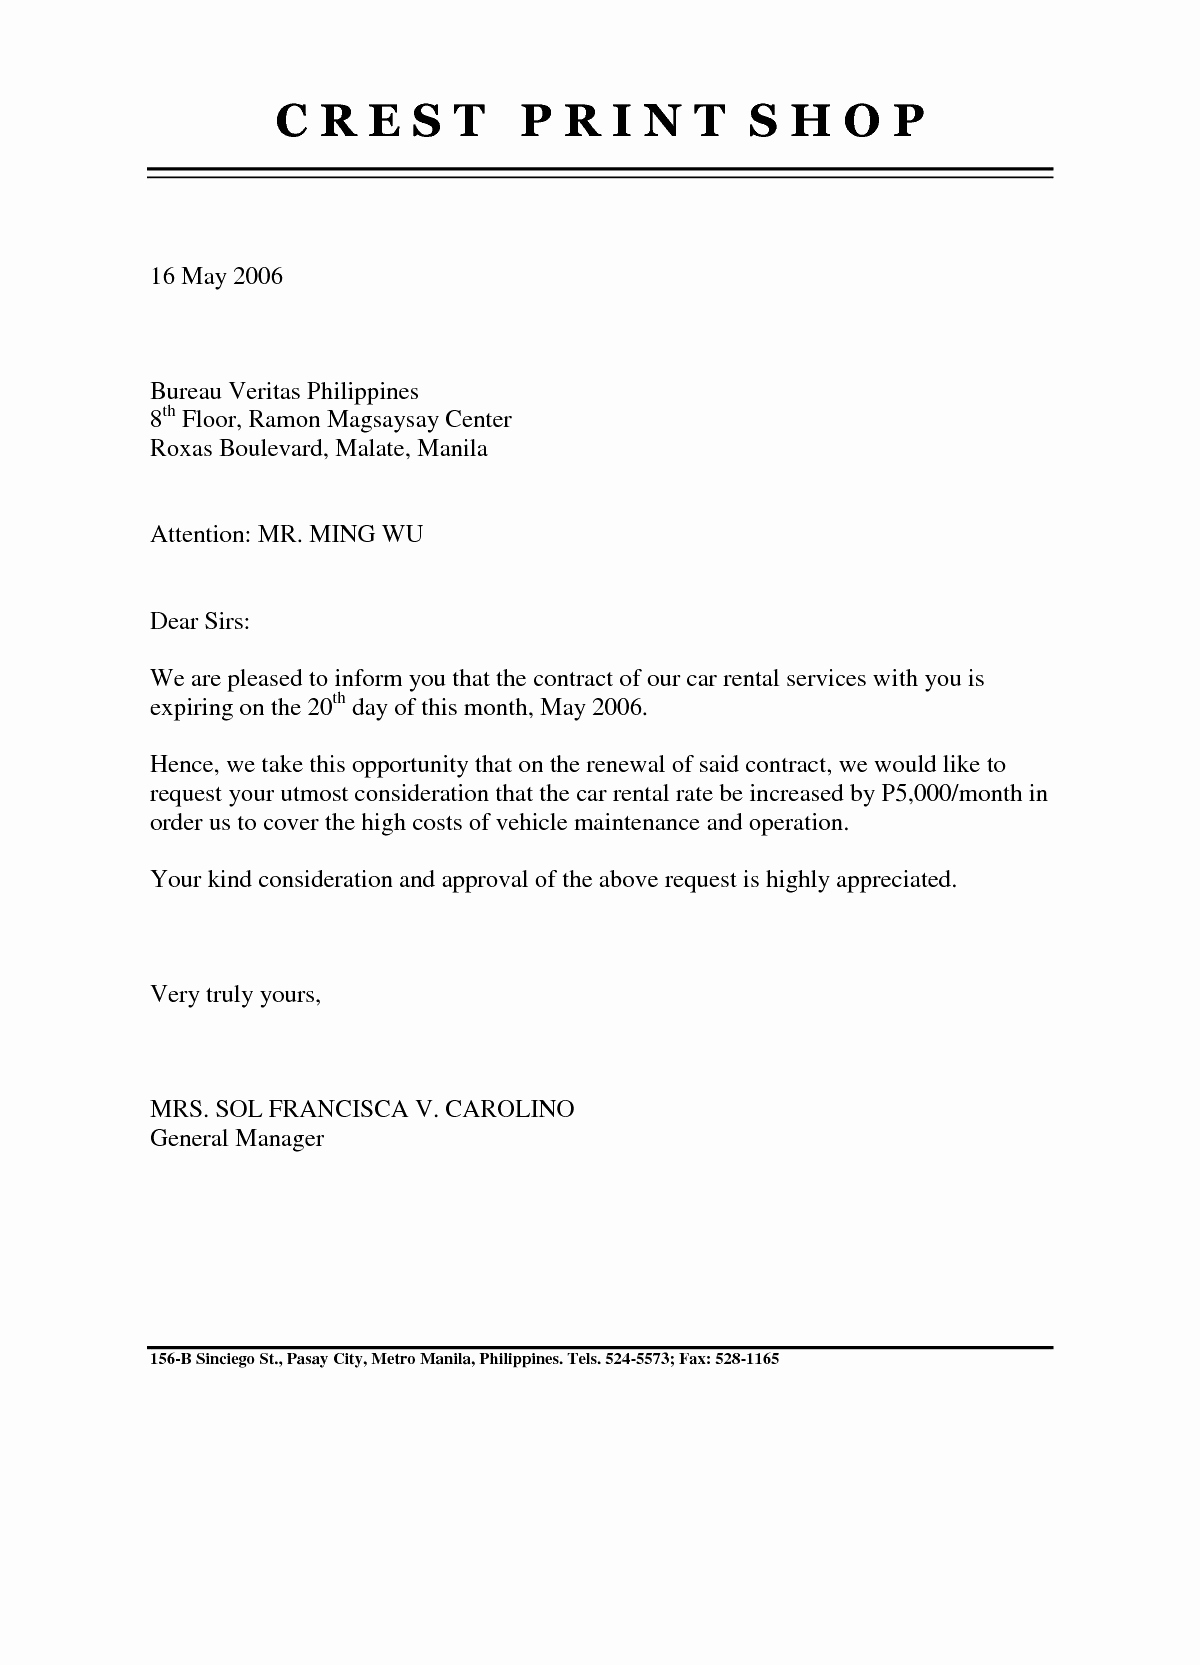 Renters Insurance Letter Template Examples Letter